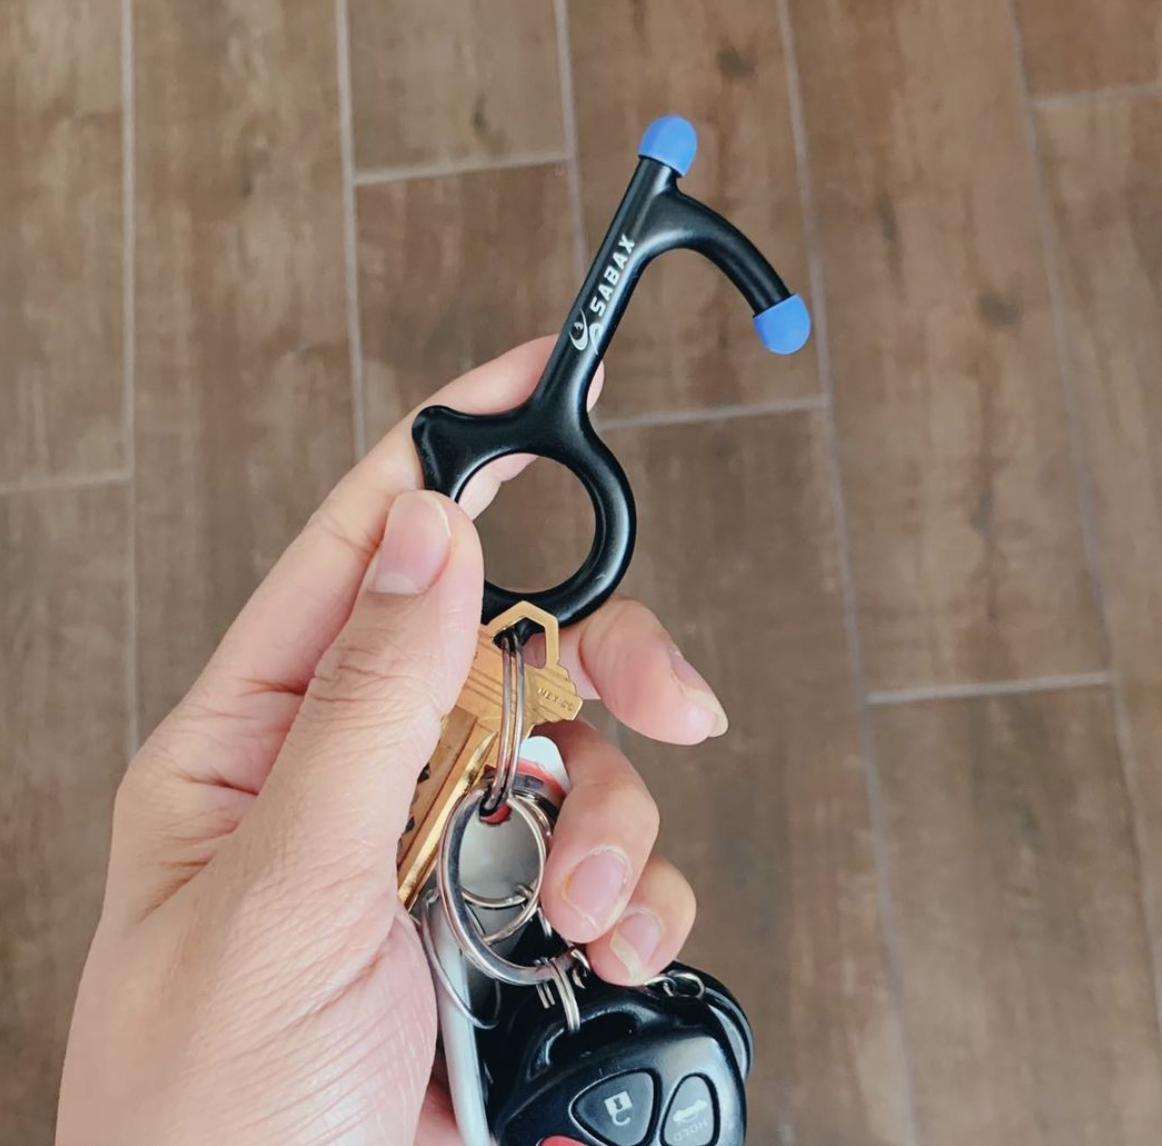 Sabax door opener tool from Amazon is affordable and great quality: sturdier than most and comes with extra stylus tips for pin pad machines. Support small business this holiday season | Kat Viana